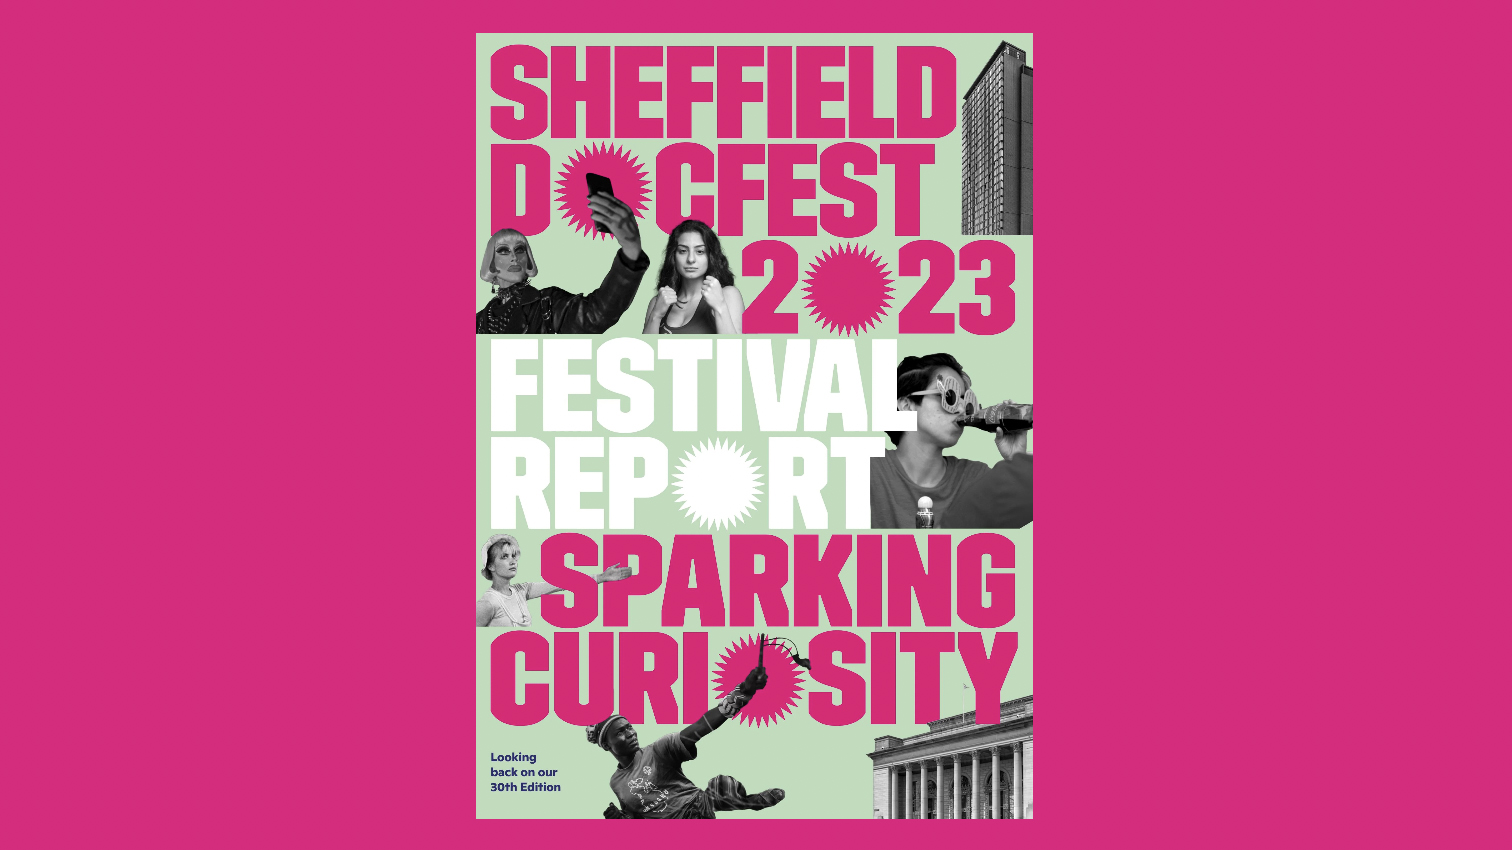 Bright pink graphic with a light green book cover in the centre. The cover of the book in bold font reads: Sheffield DocFest 2023 Festival Report, Sparking Curiosity